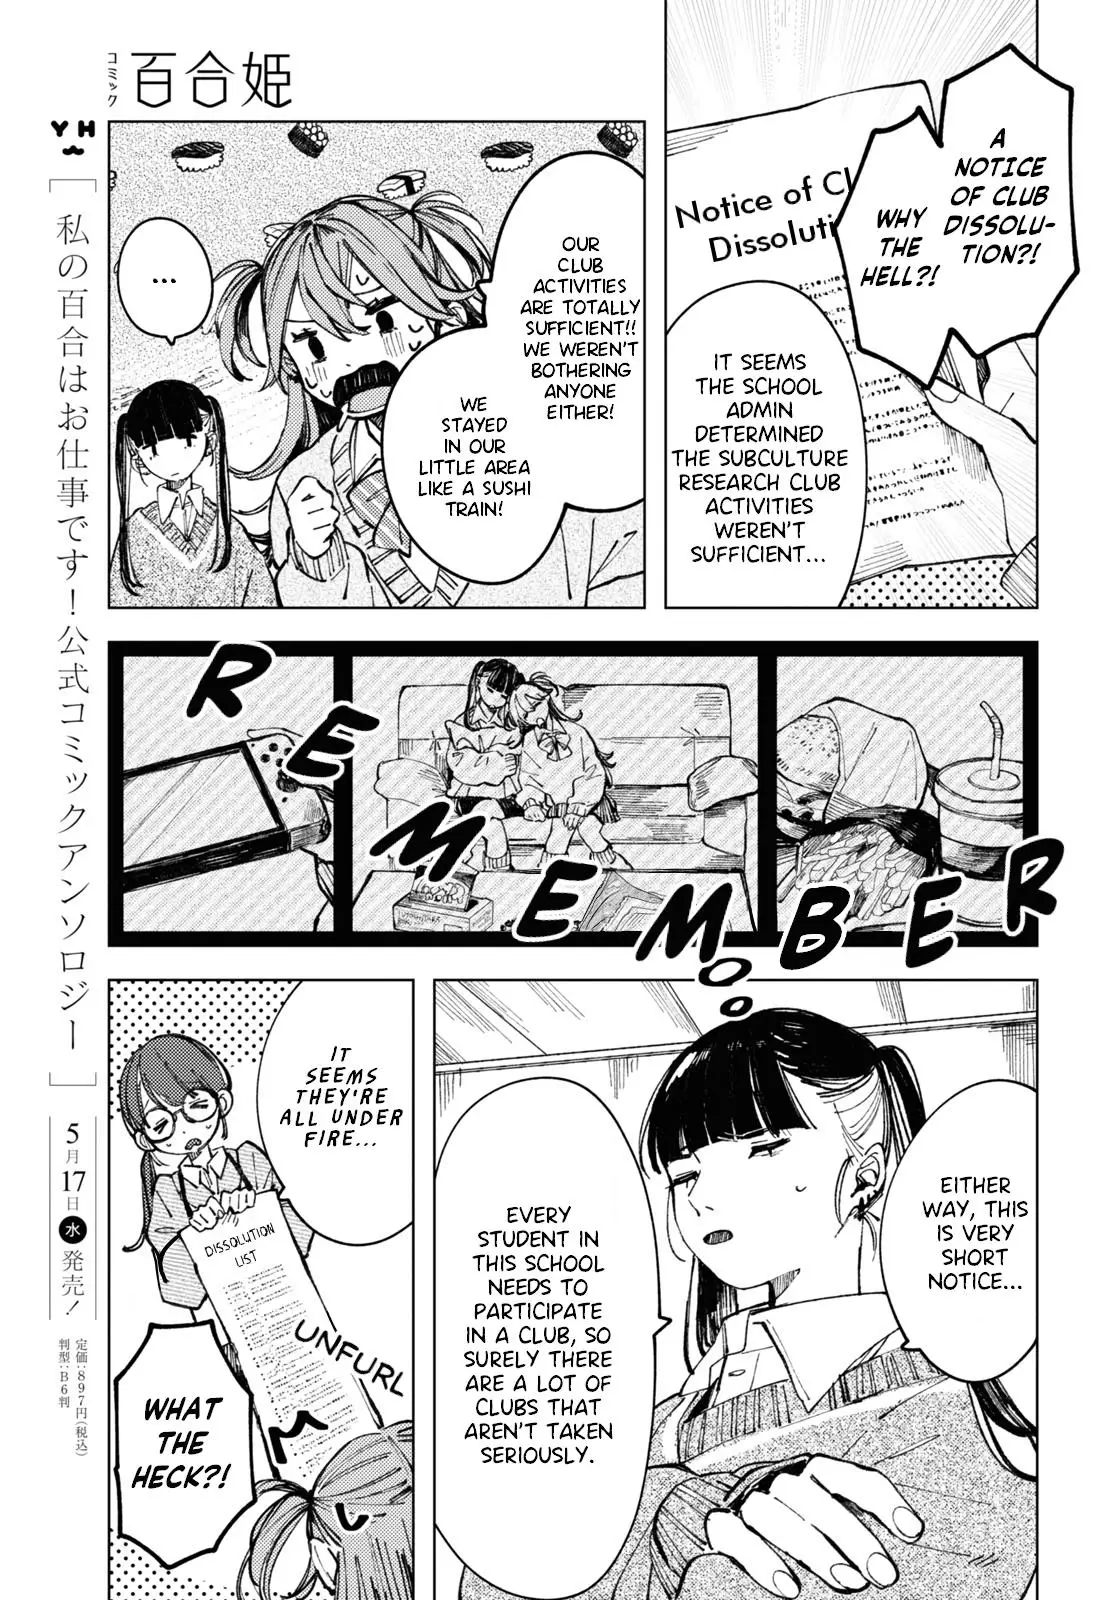 Even The Introverted Gals Wanna Get Out There! - 6 page 3-19977647